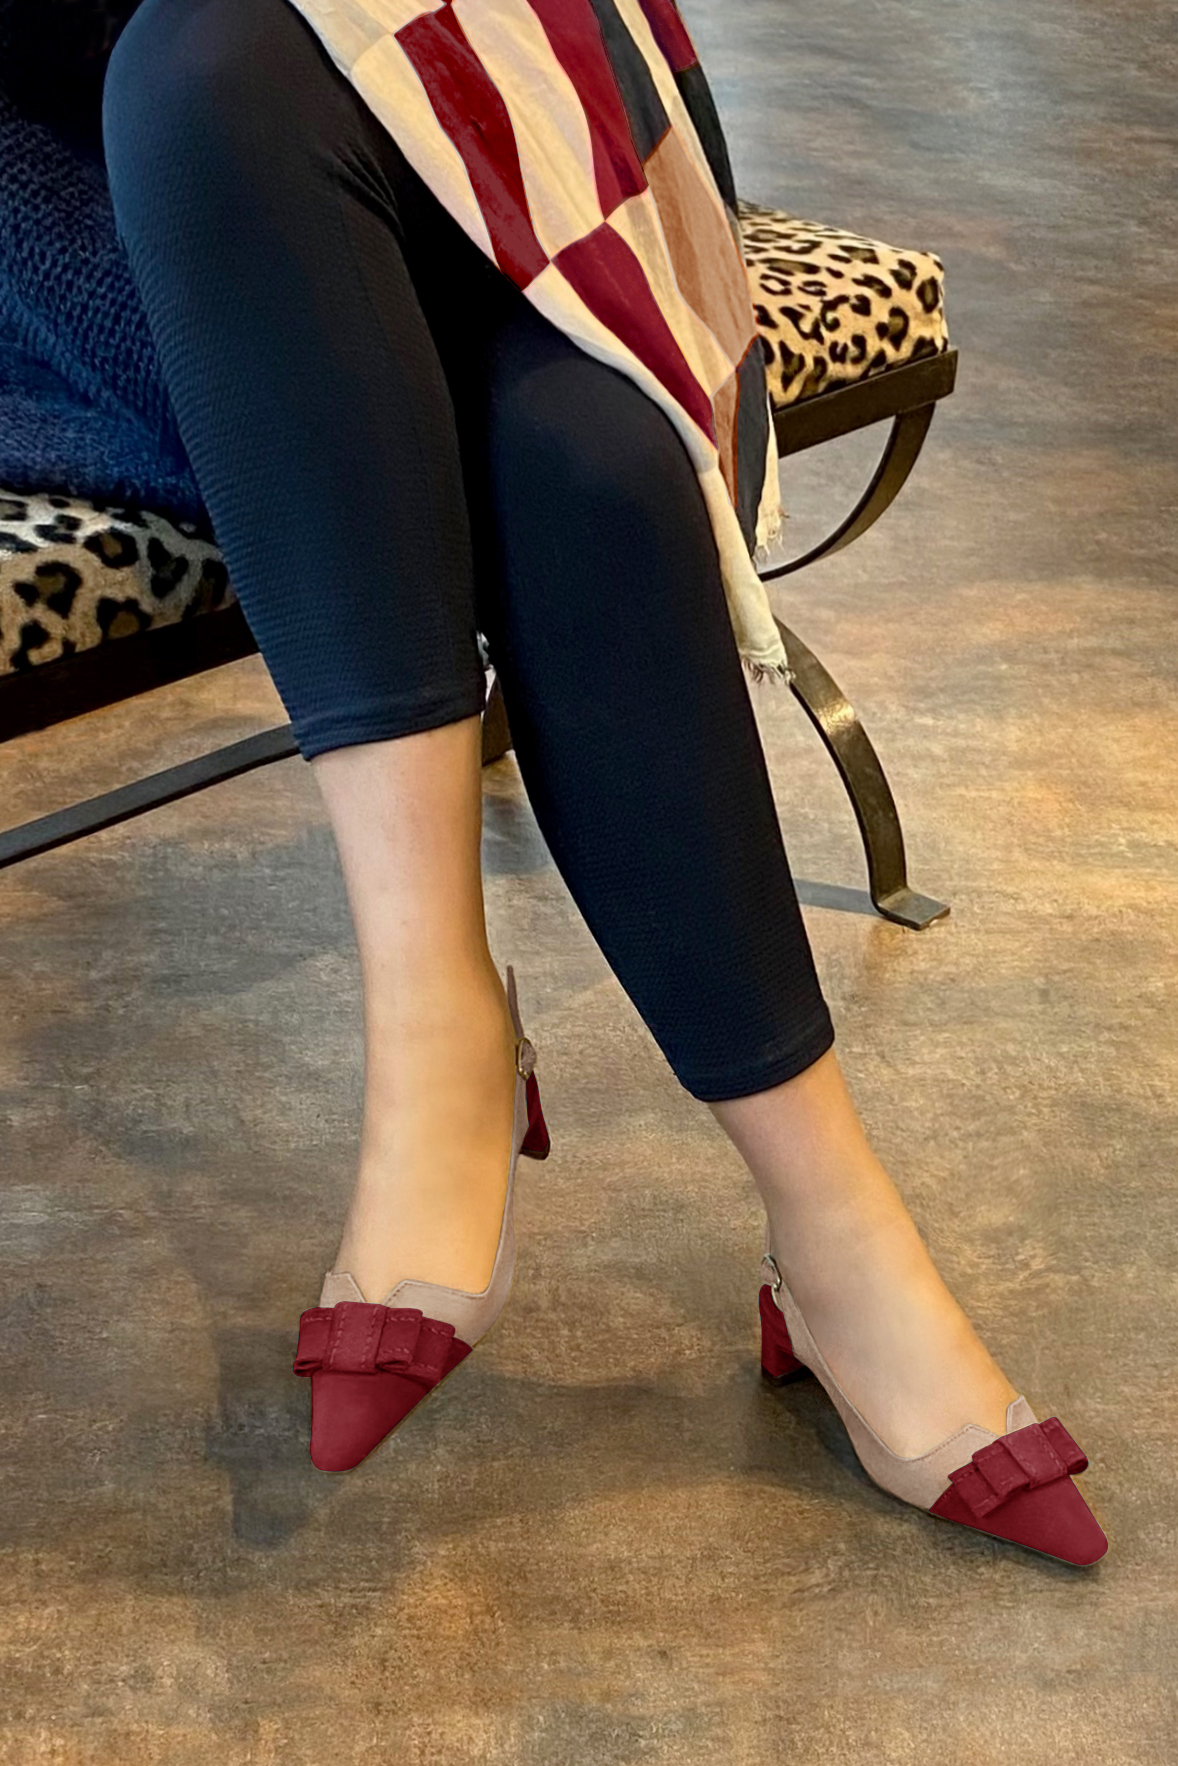 Burgundy red and tan beige matching shoes and clutch. Worn view - Florence KOOIJMAN